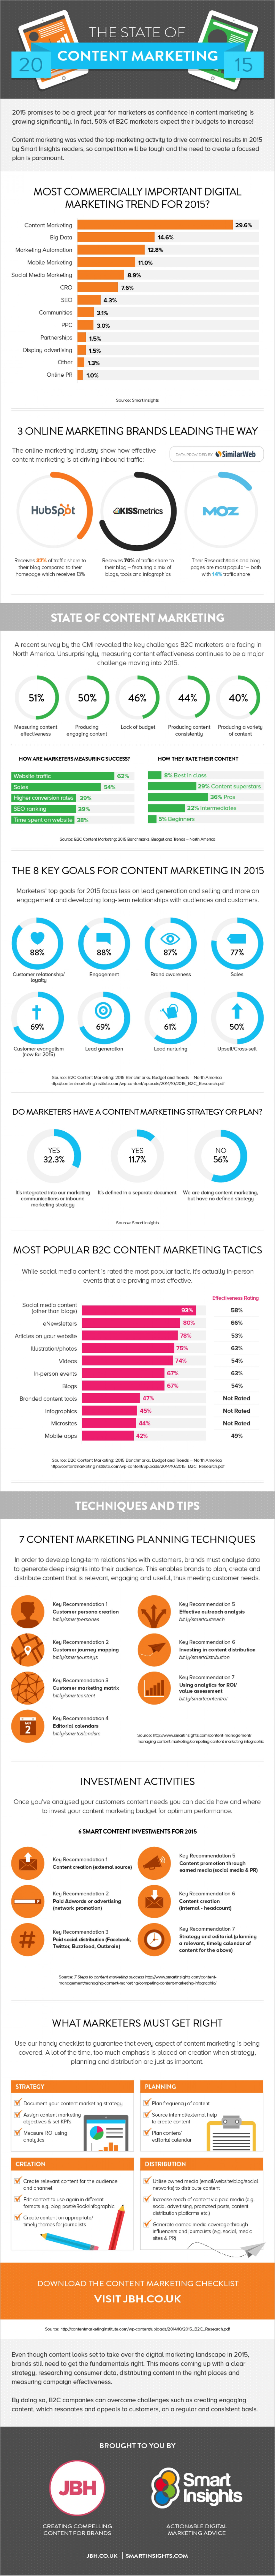 infographic - the state of content marketing 2015